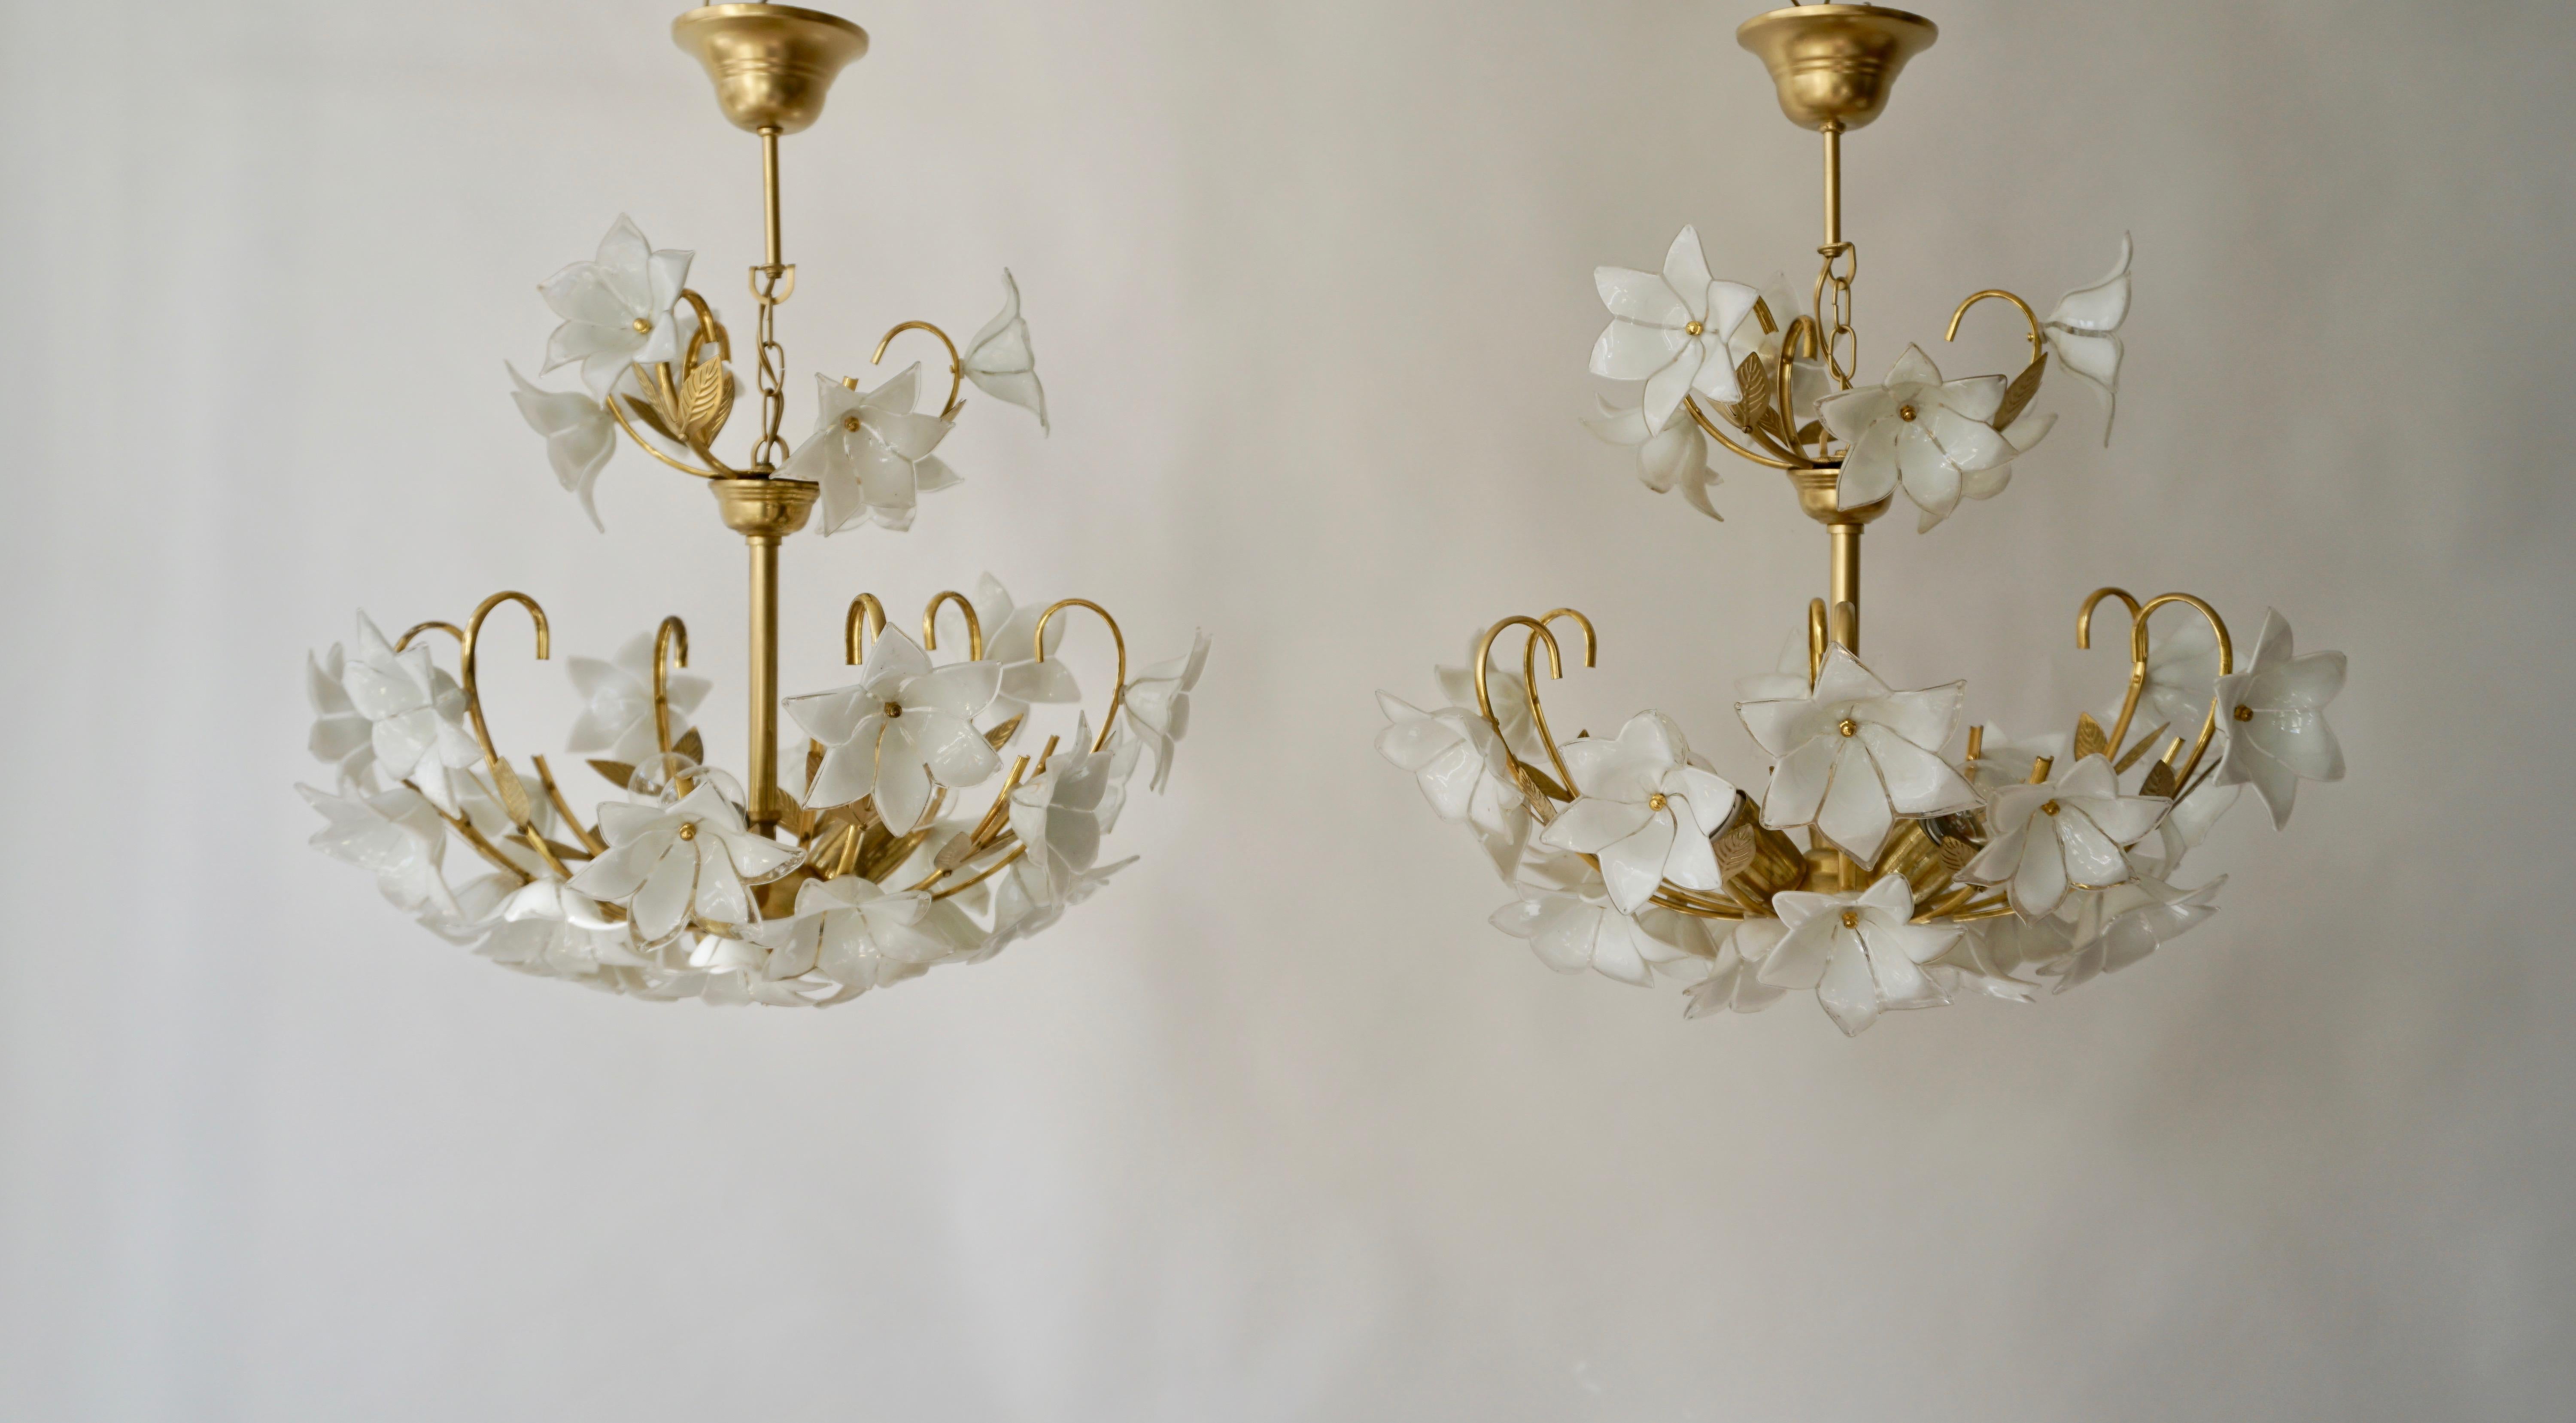 Two Italian chandeliers, 1970s Murano Art Glass chic and very particular, handmade flowers in Murano glass, a structure in brass and lacquered metal, truly unique and elegant in its kind.
Diameter 20.47 inch - 52 cm.
Height fixture 17.32 inch - 44